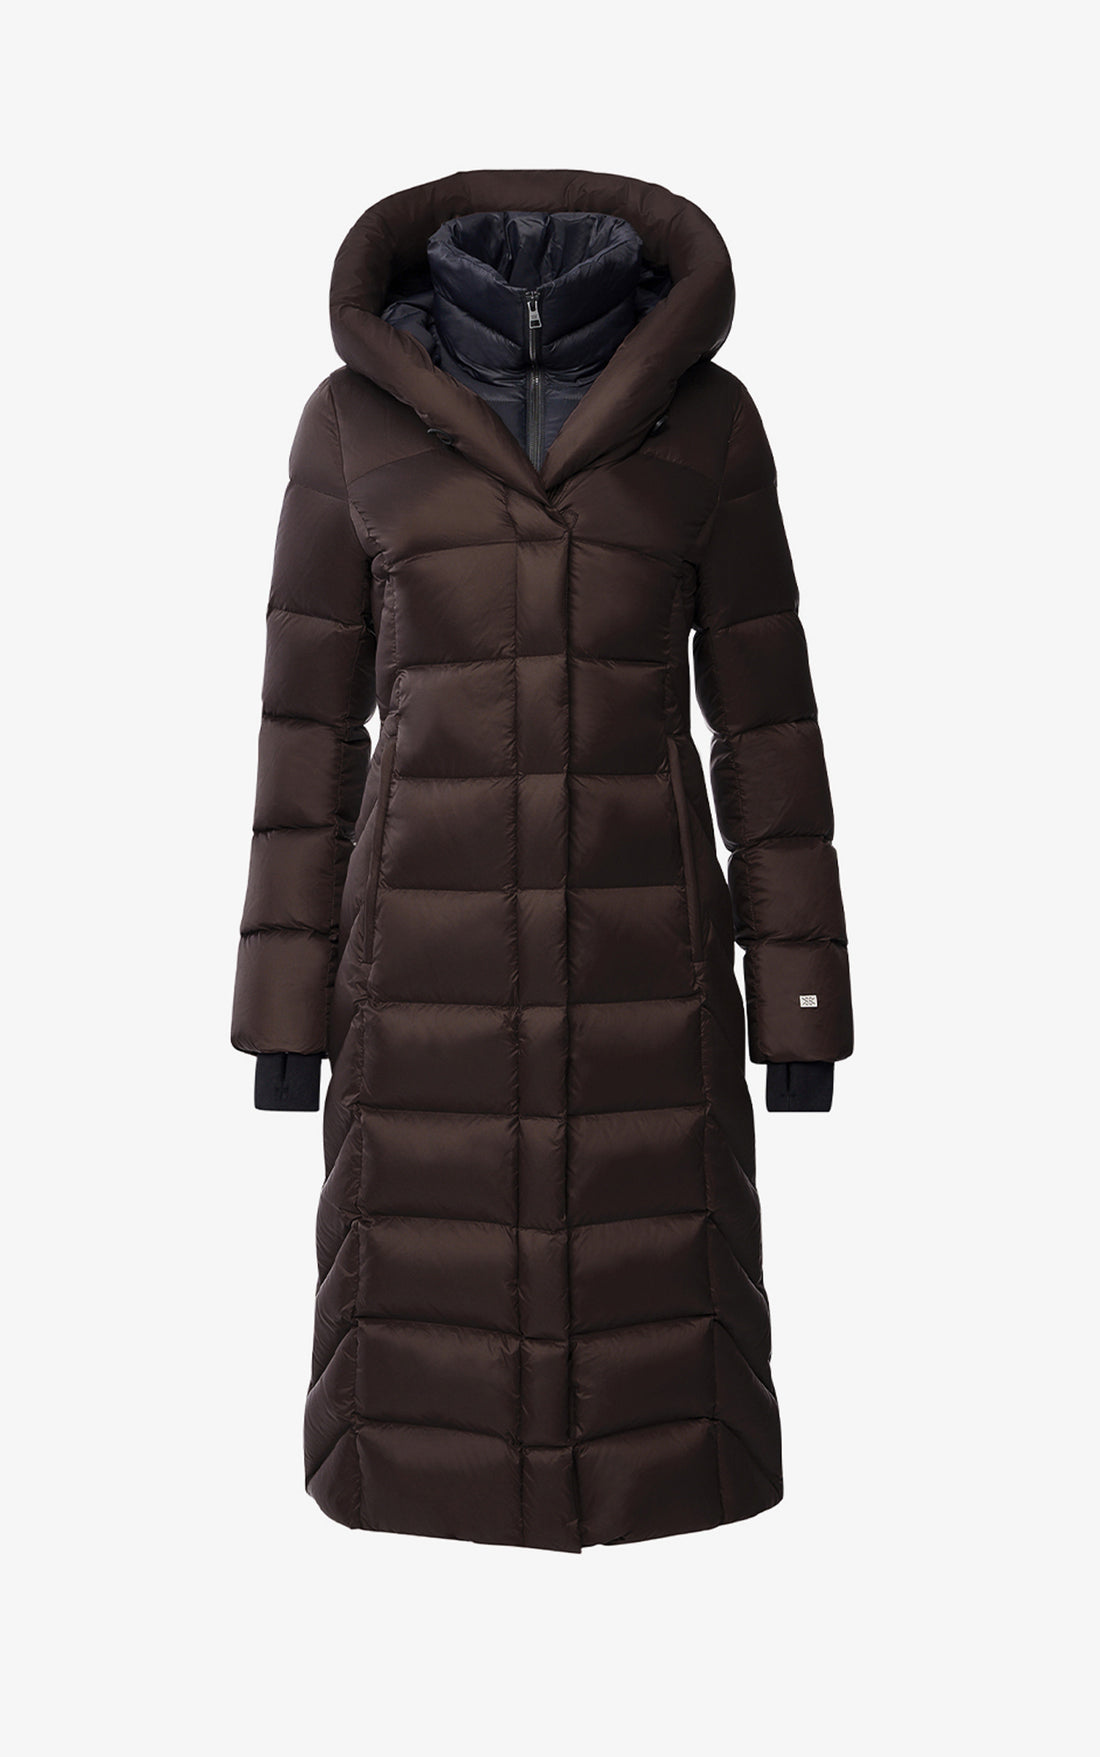 Talyse, Sustainable calf-length down coat with hood | Soia & Kyo US